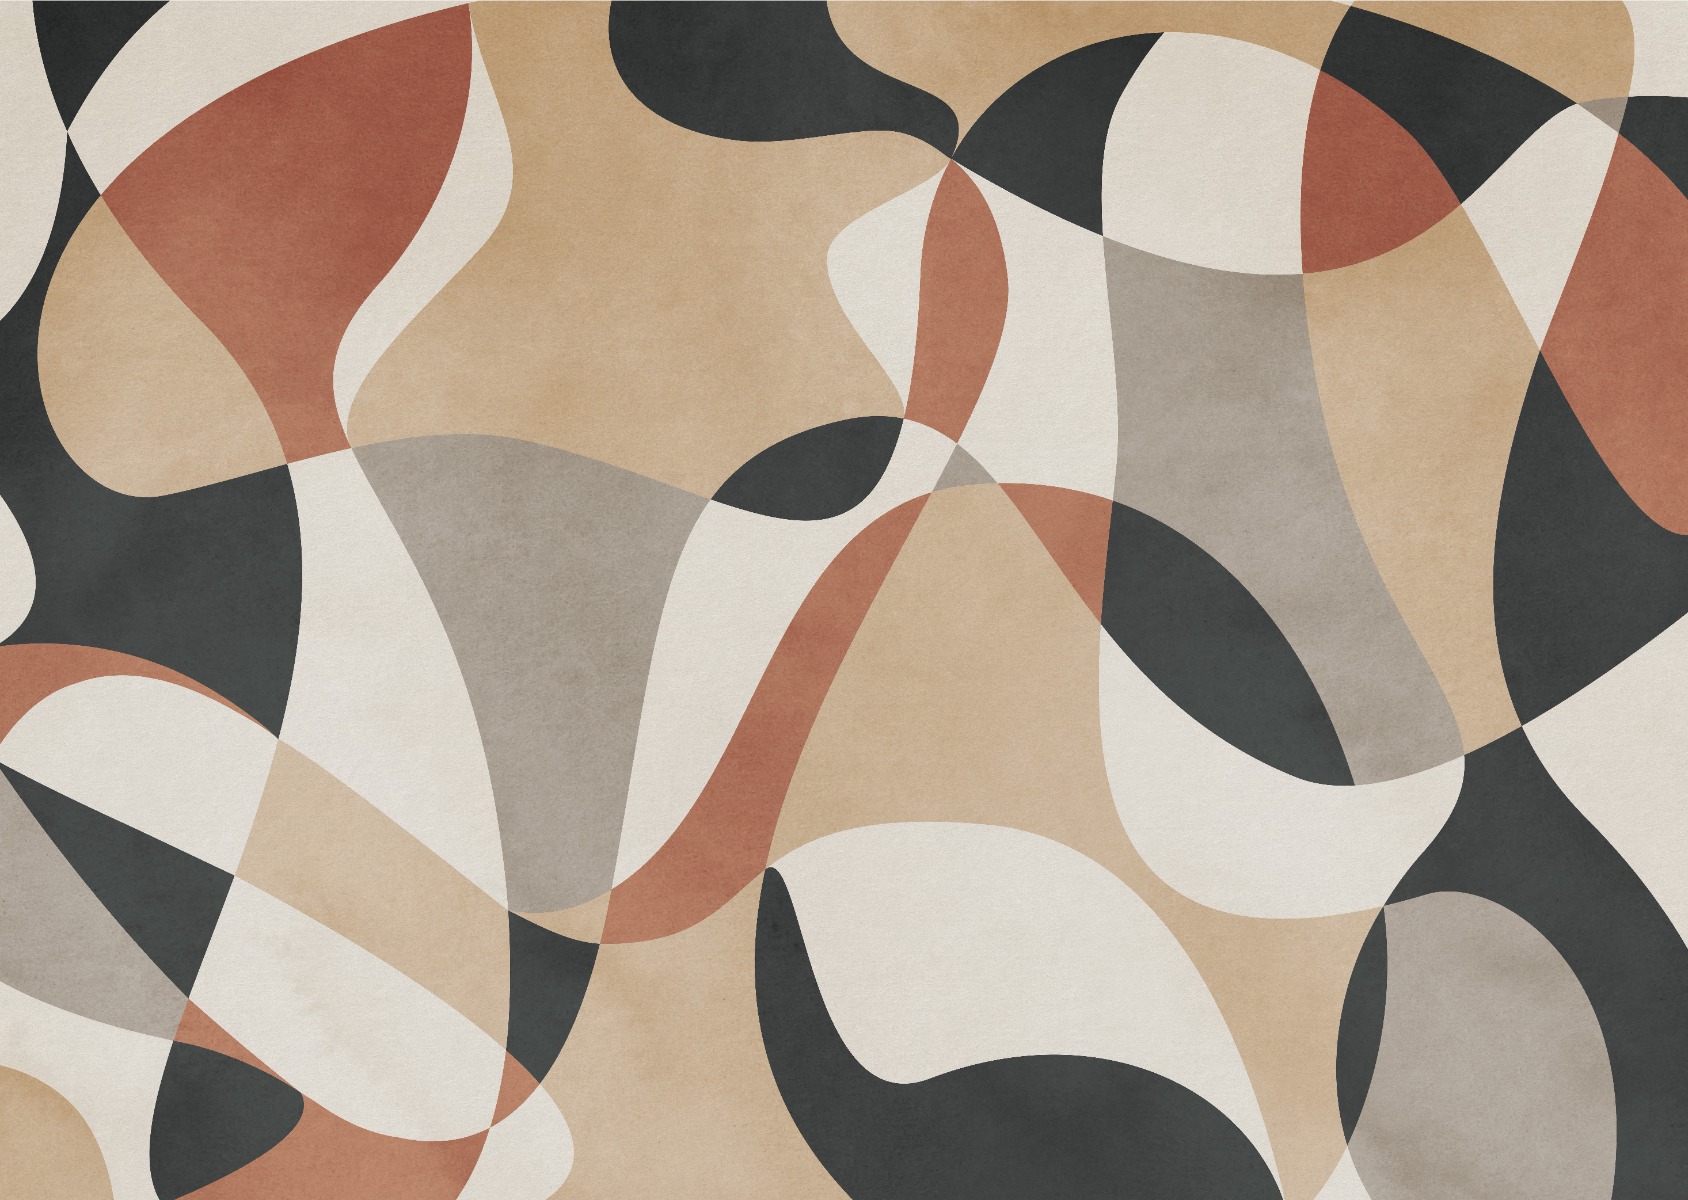 Details more than 75 abstract wallpaper for walls